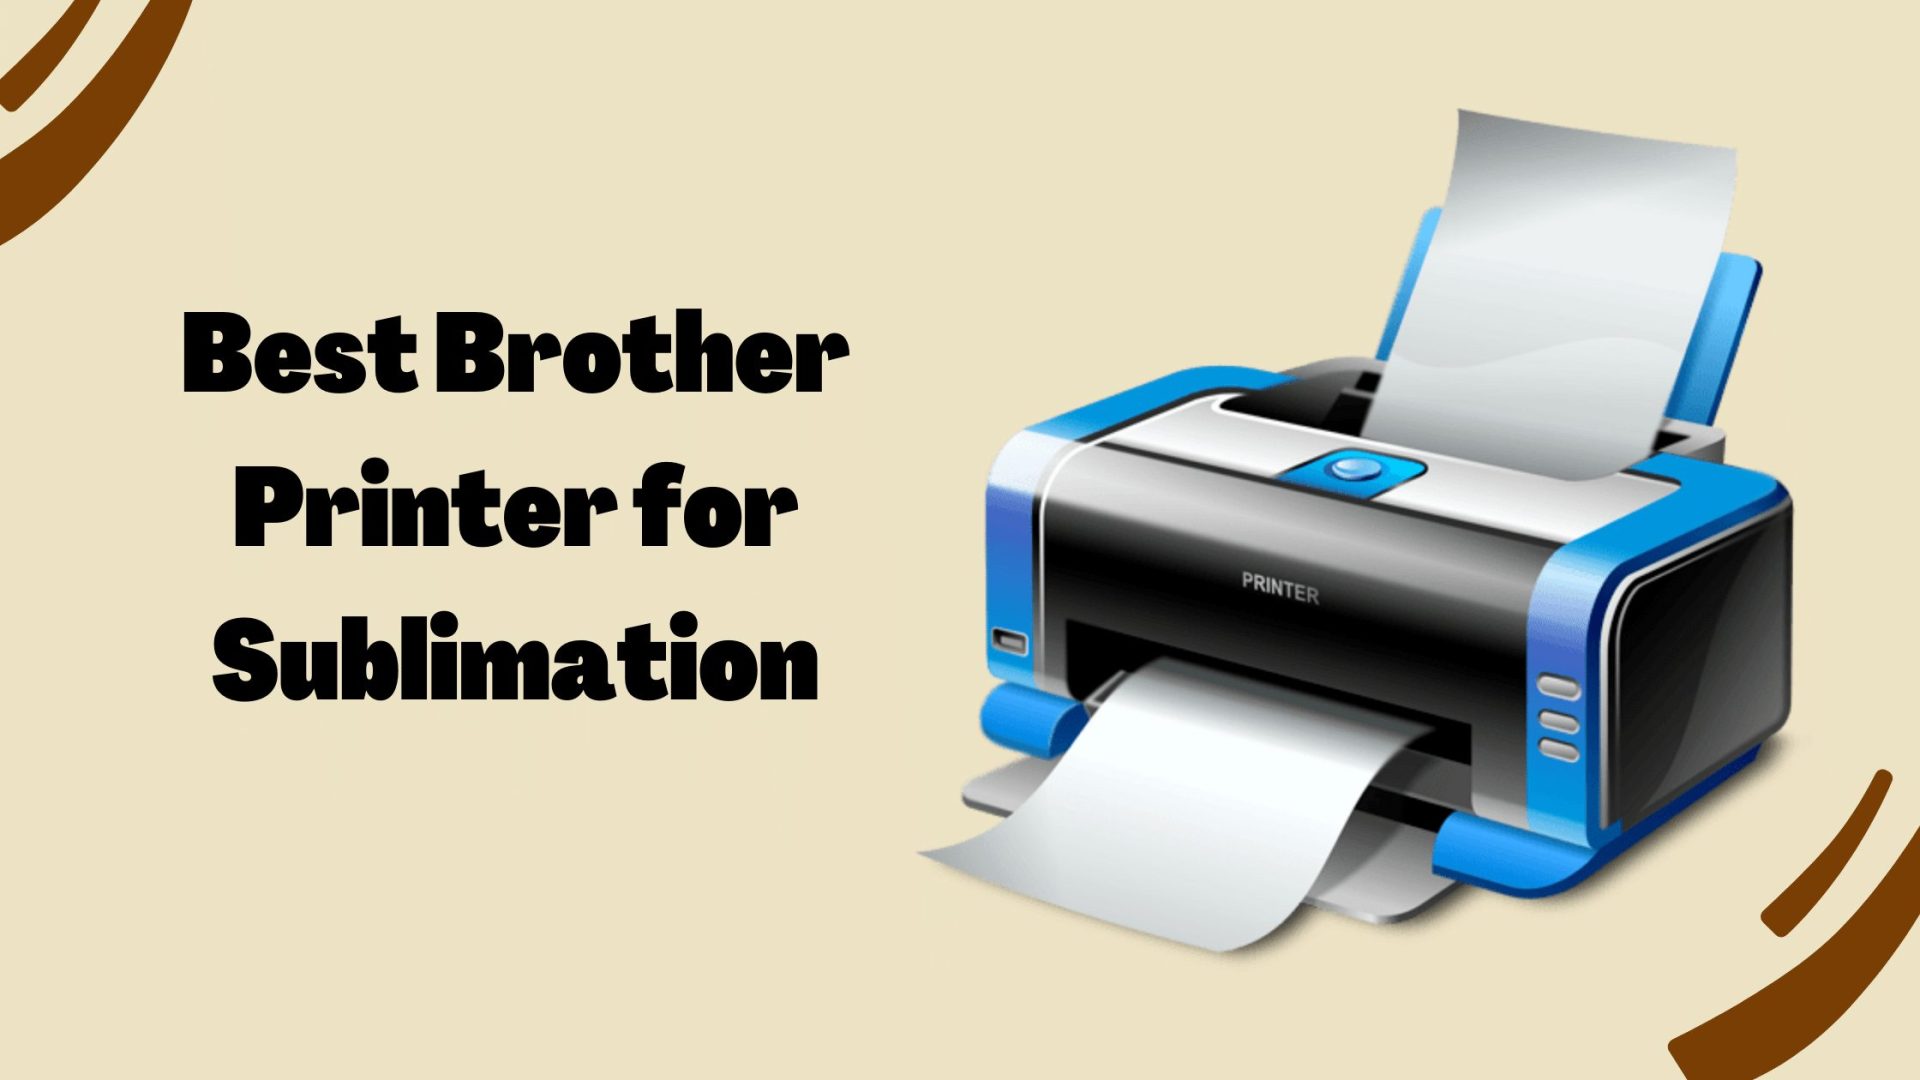 Best Brother Printer for Sublimation